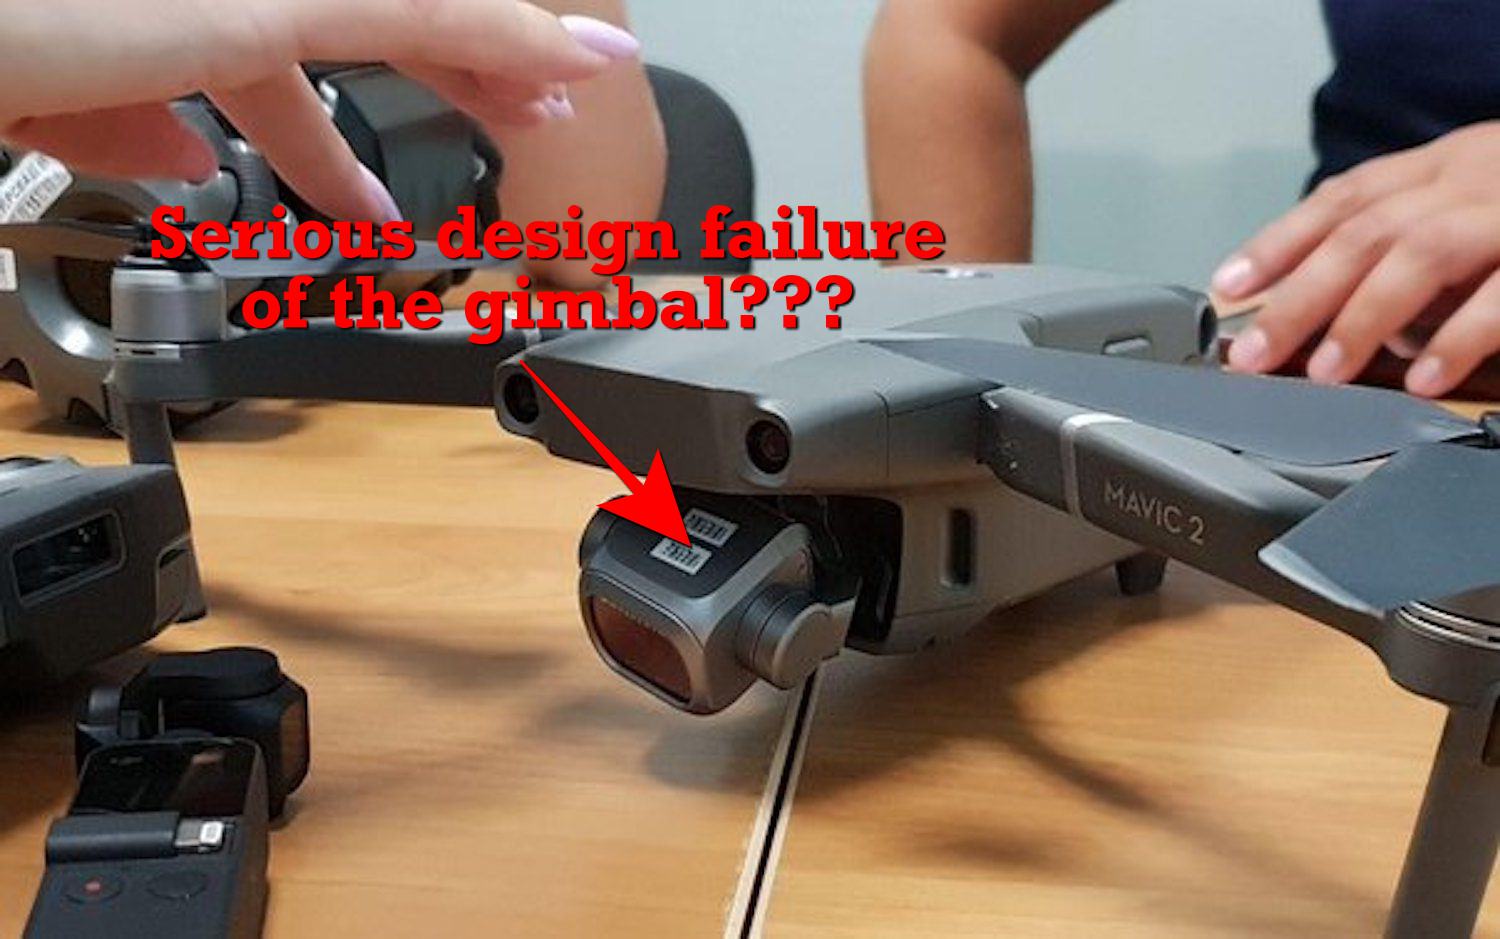 Serious design failure of the Mavic 2's gimbal rumored to be reason for DJI's postponement of the "See the Bigger Picture" event